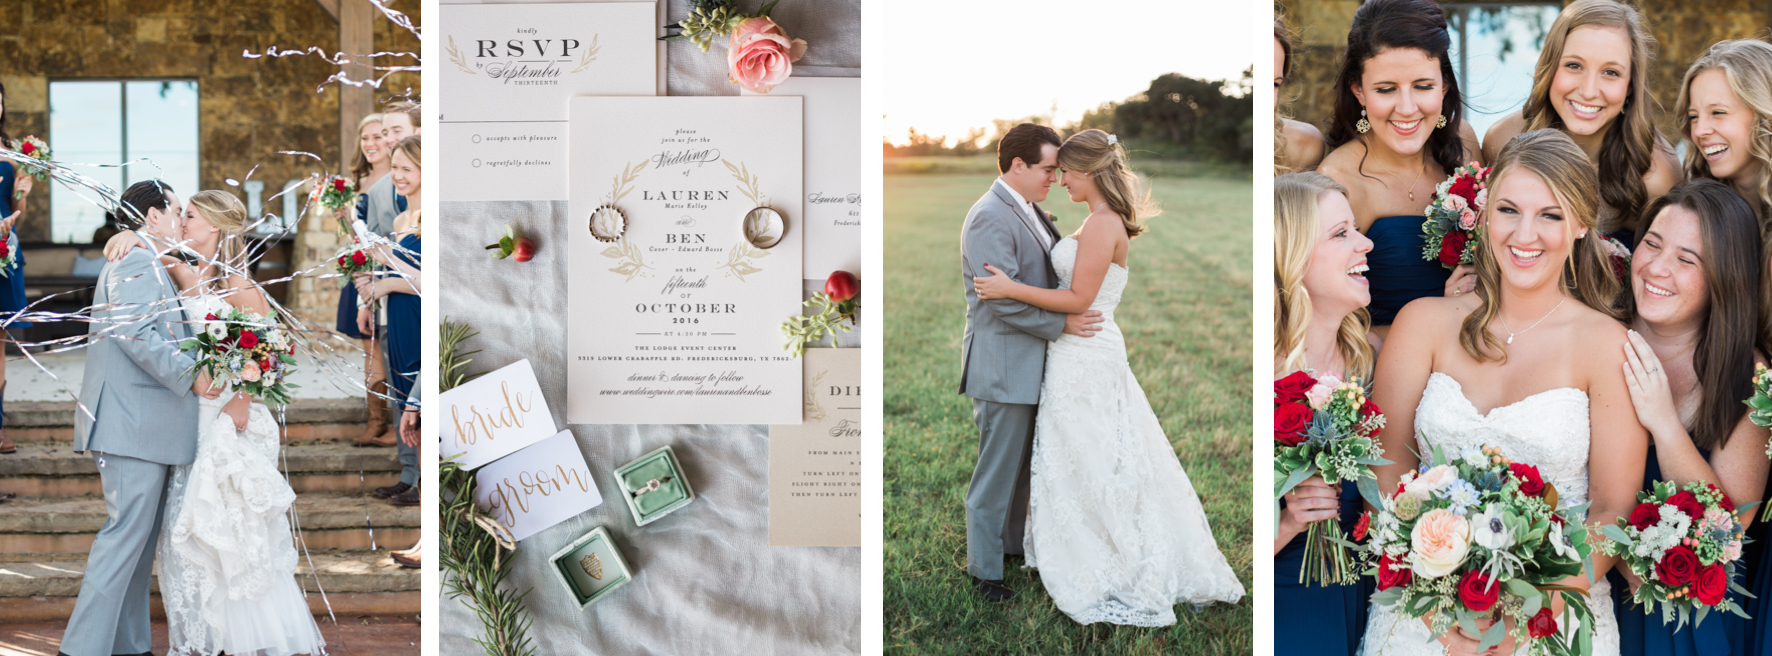 The Lodge Event Center Wedding in Fredericksburg Photographer by Lori Blythe Photography